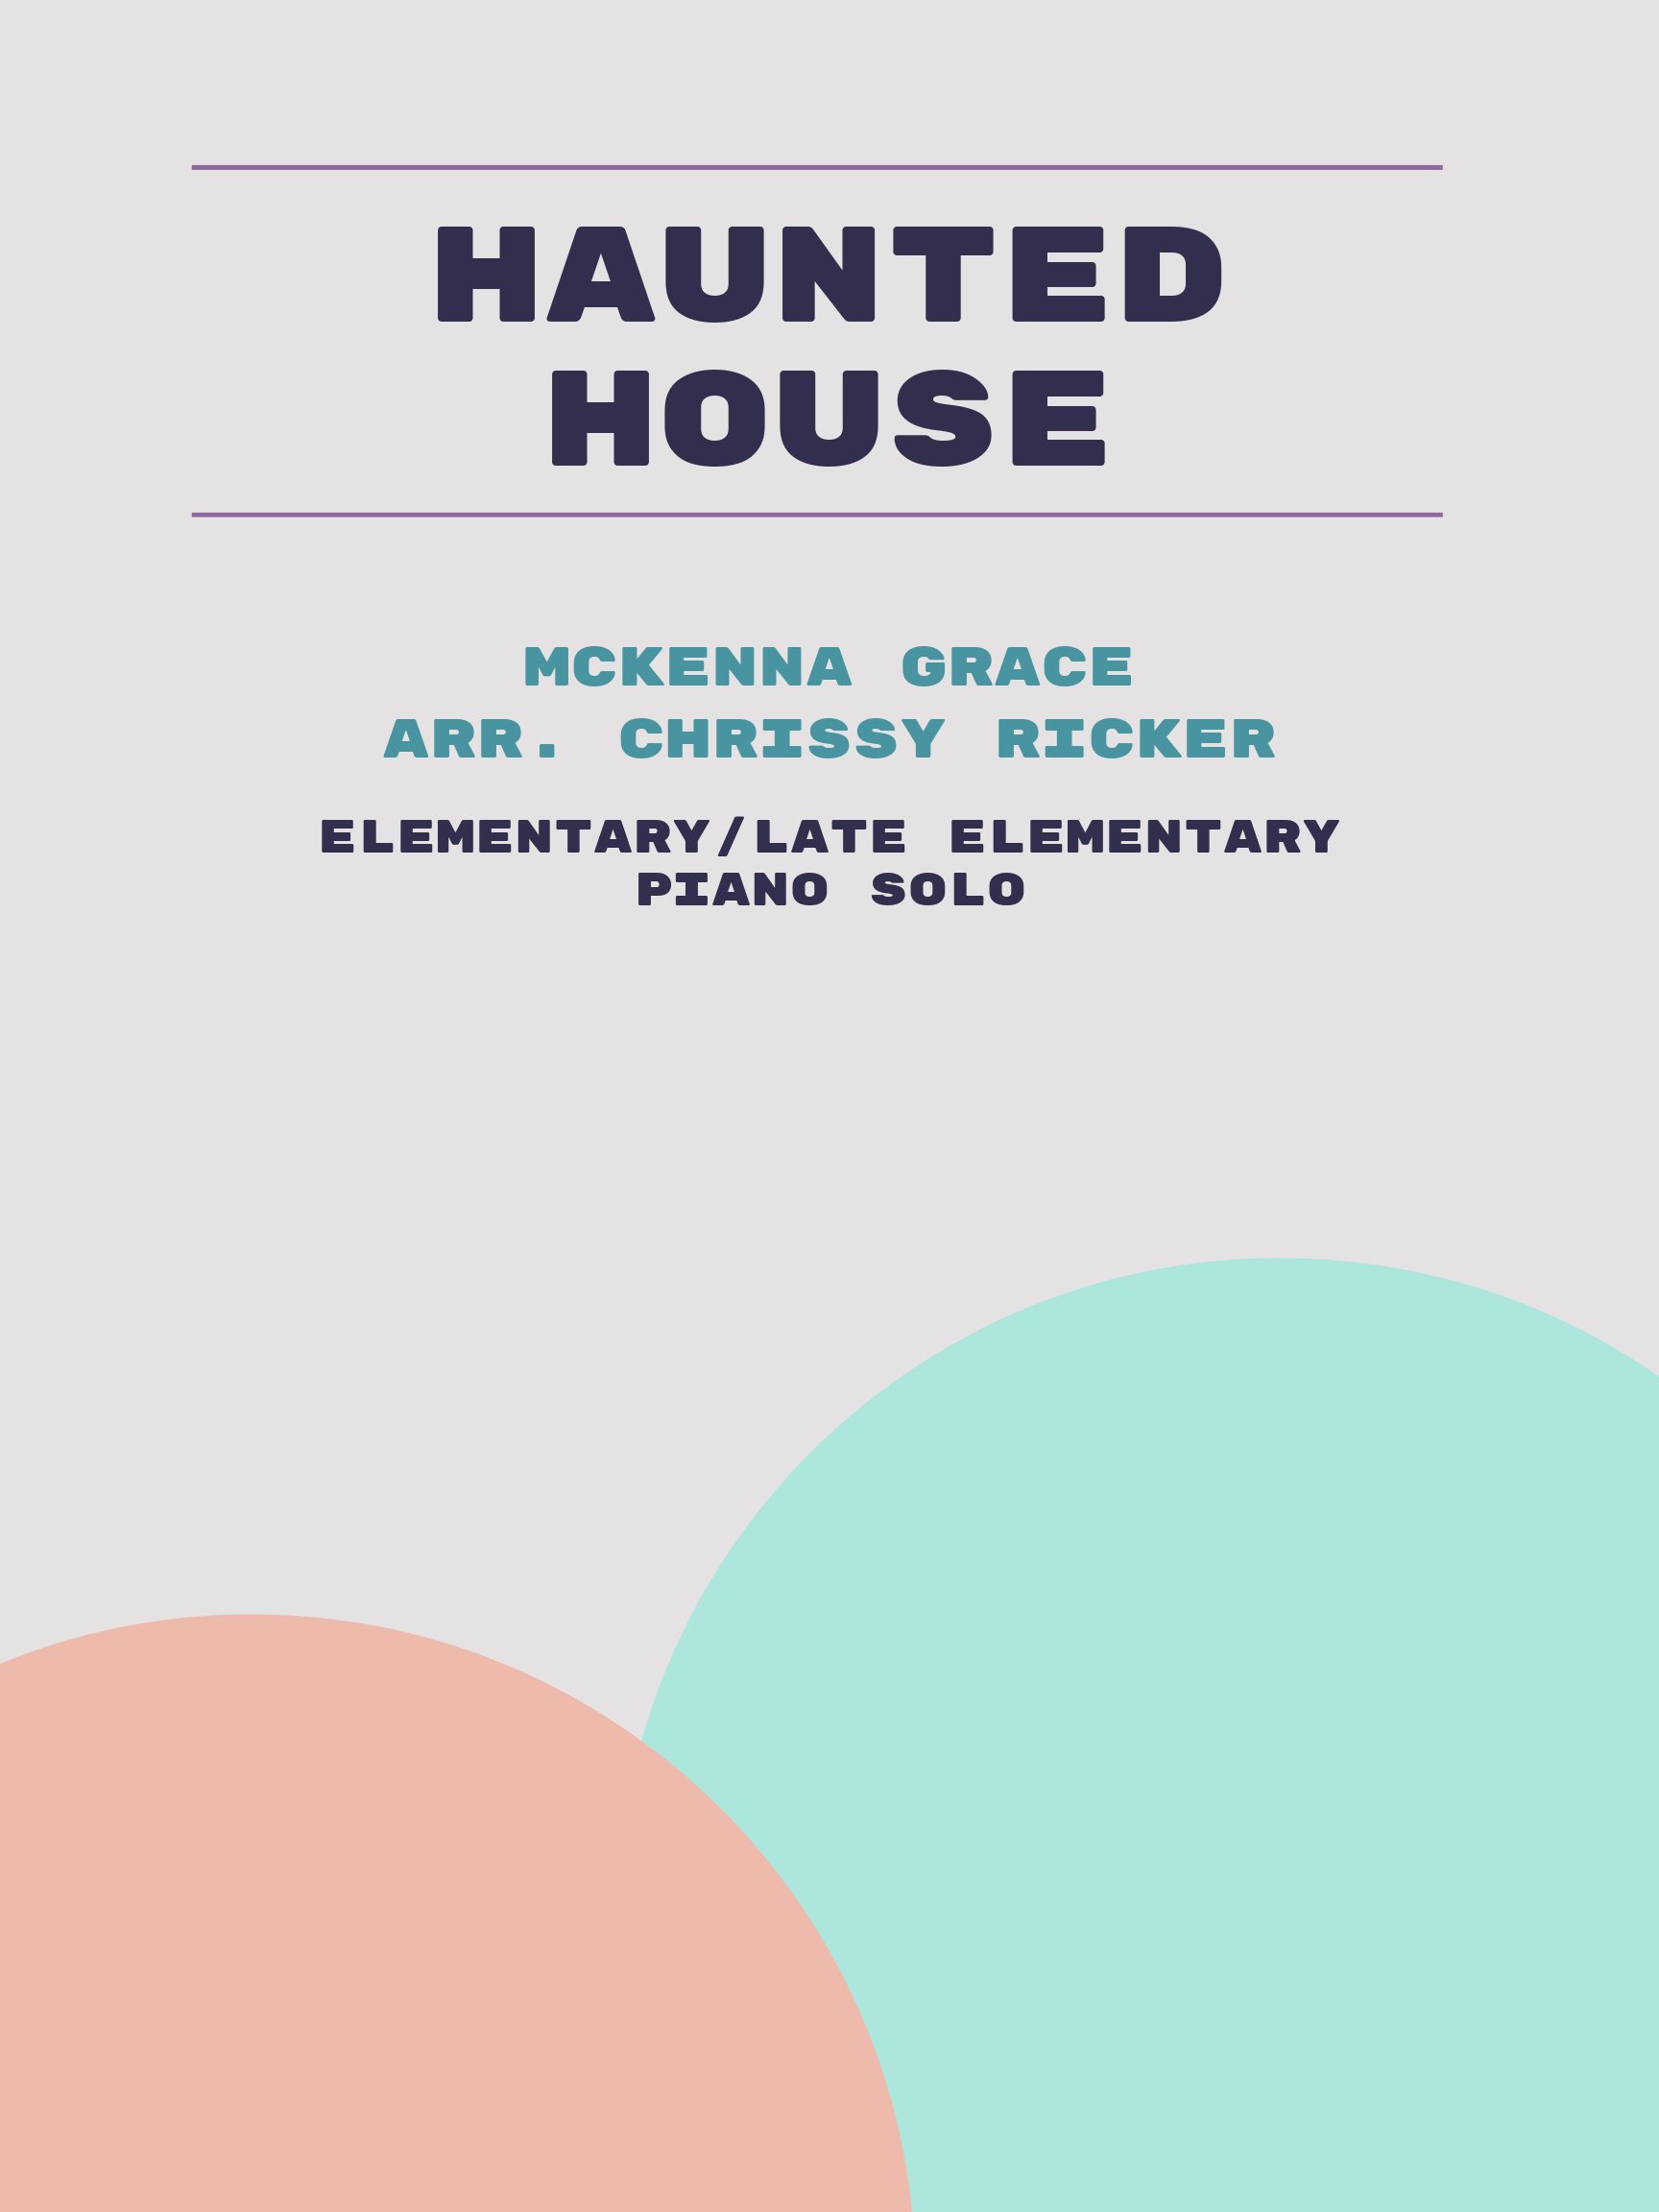 Haunted House by Mckenna Grace